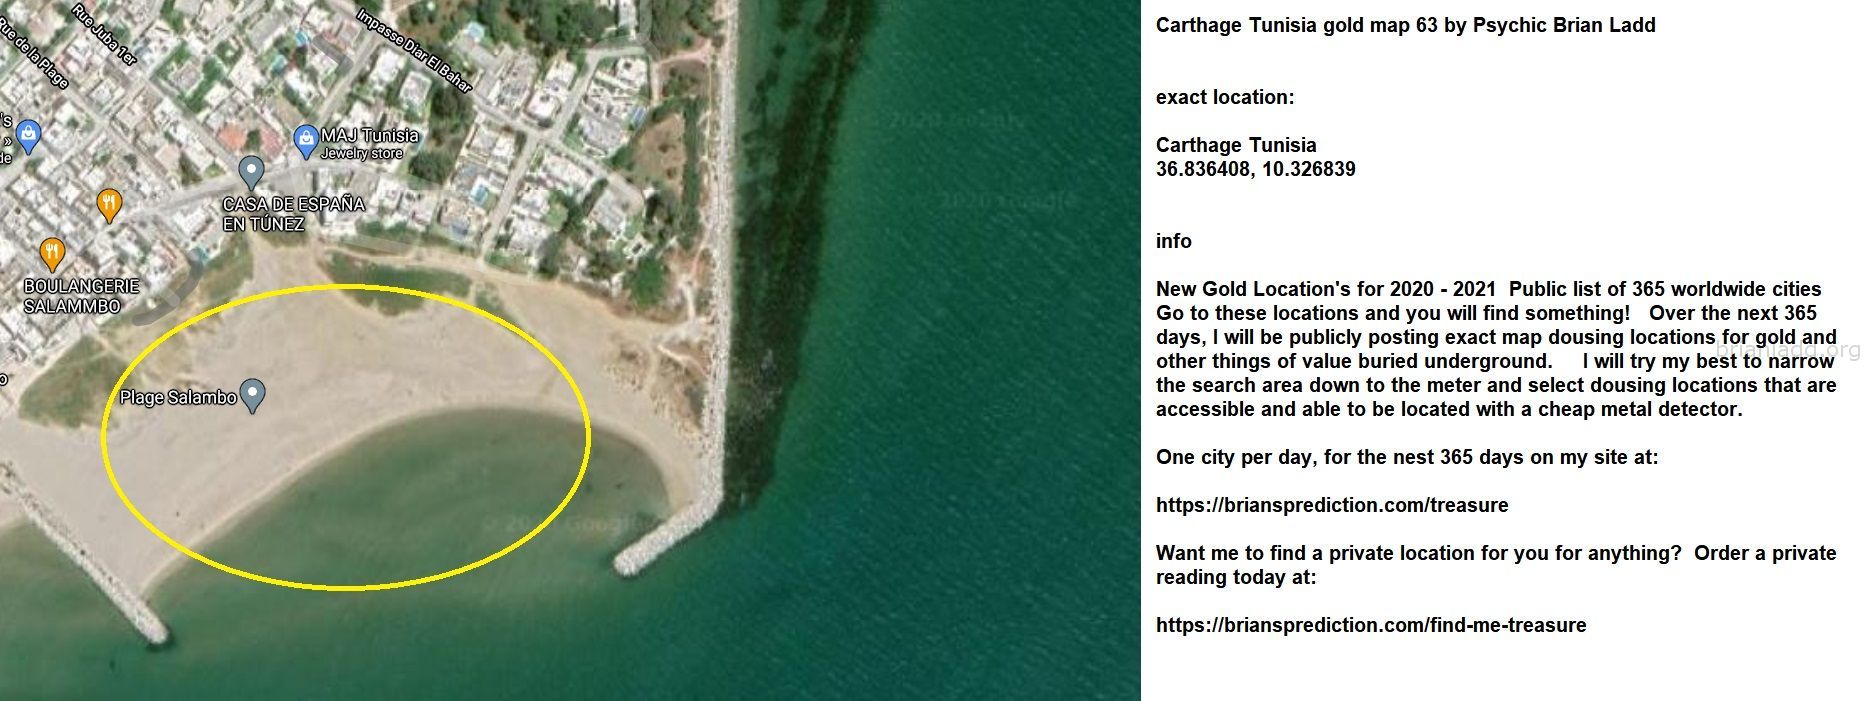 Carthage Tunisia Gold Map 63 By Psychic Brian Ladd - Carthage Tunisia Gold Map 63 By Psychic Brian Ladd  Exact Location:...
Carthage Tunisia Gold Map 63 By Psychic Brian Ladd  Exact Location:  Carthage Tunisia  36.836408, 10.326839  Info  New Gold Location'S For 2020 - 2021  Public List Of 365 Worldwide Cities  Go To These Locations And You Will Find Something!  Over The Next 365 Days, I Will Be Publicly Posting Exact Map Dousing Locations For Gold And Other Things Of Value Buried Underground.  I Will Try My Best To Narrow The Search Area Down To The Meter And Select Dousing Locations That Are Accessible And Able To Be Located With A Cheap Metal Detector.  One City Per Day, For The Nest 365 Days On My Site At:   https://briansprediction.com/Treasure  Want Me To Find A Private Location For You For Anything?  Order A Private Reading Today At:   https://briansprediction.com/Find-Me-Treasure
